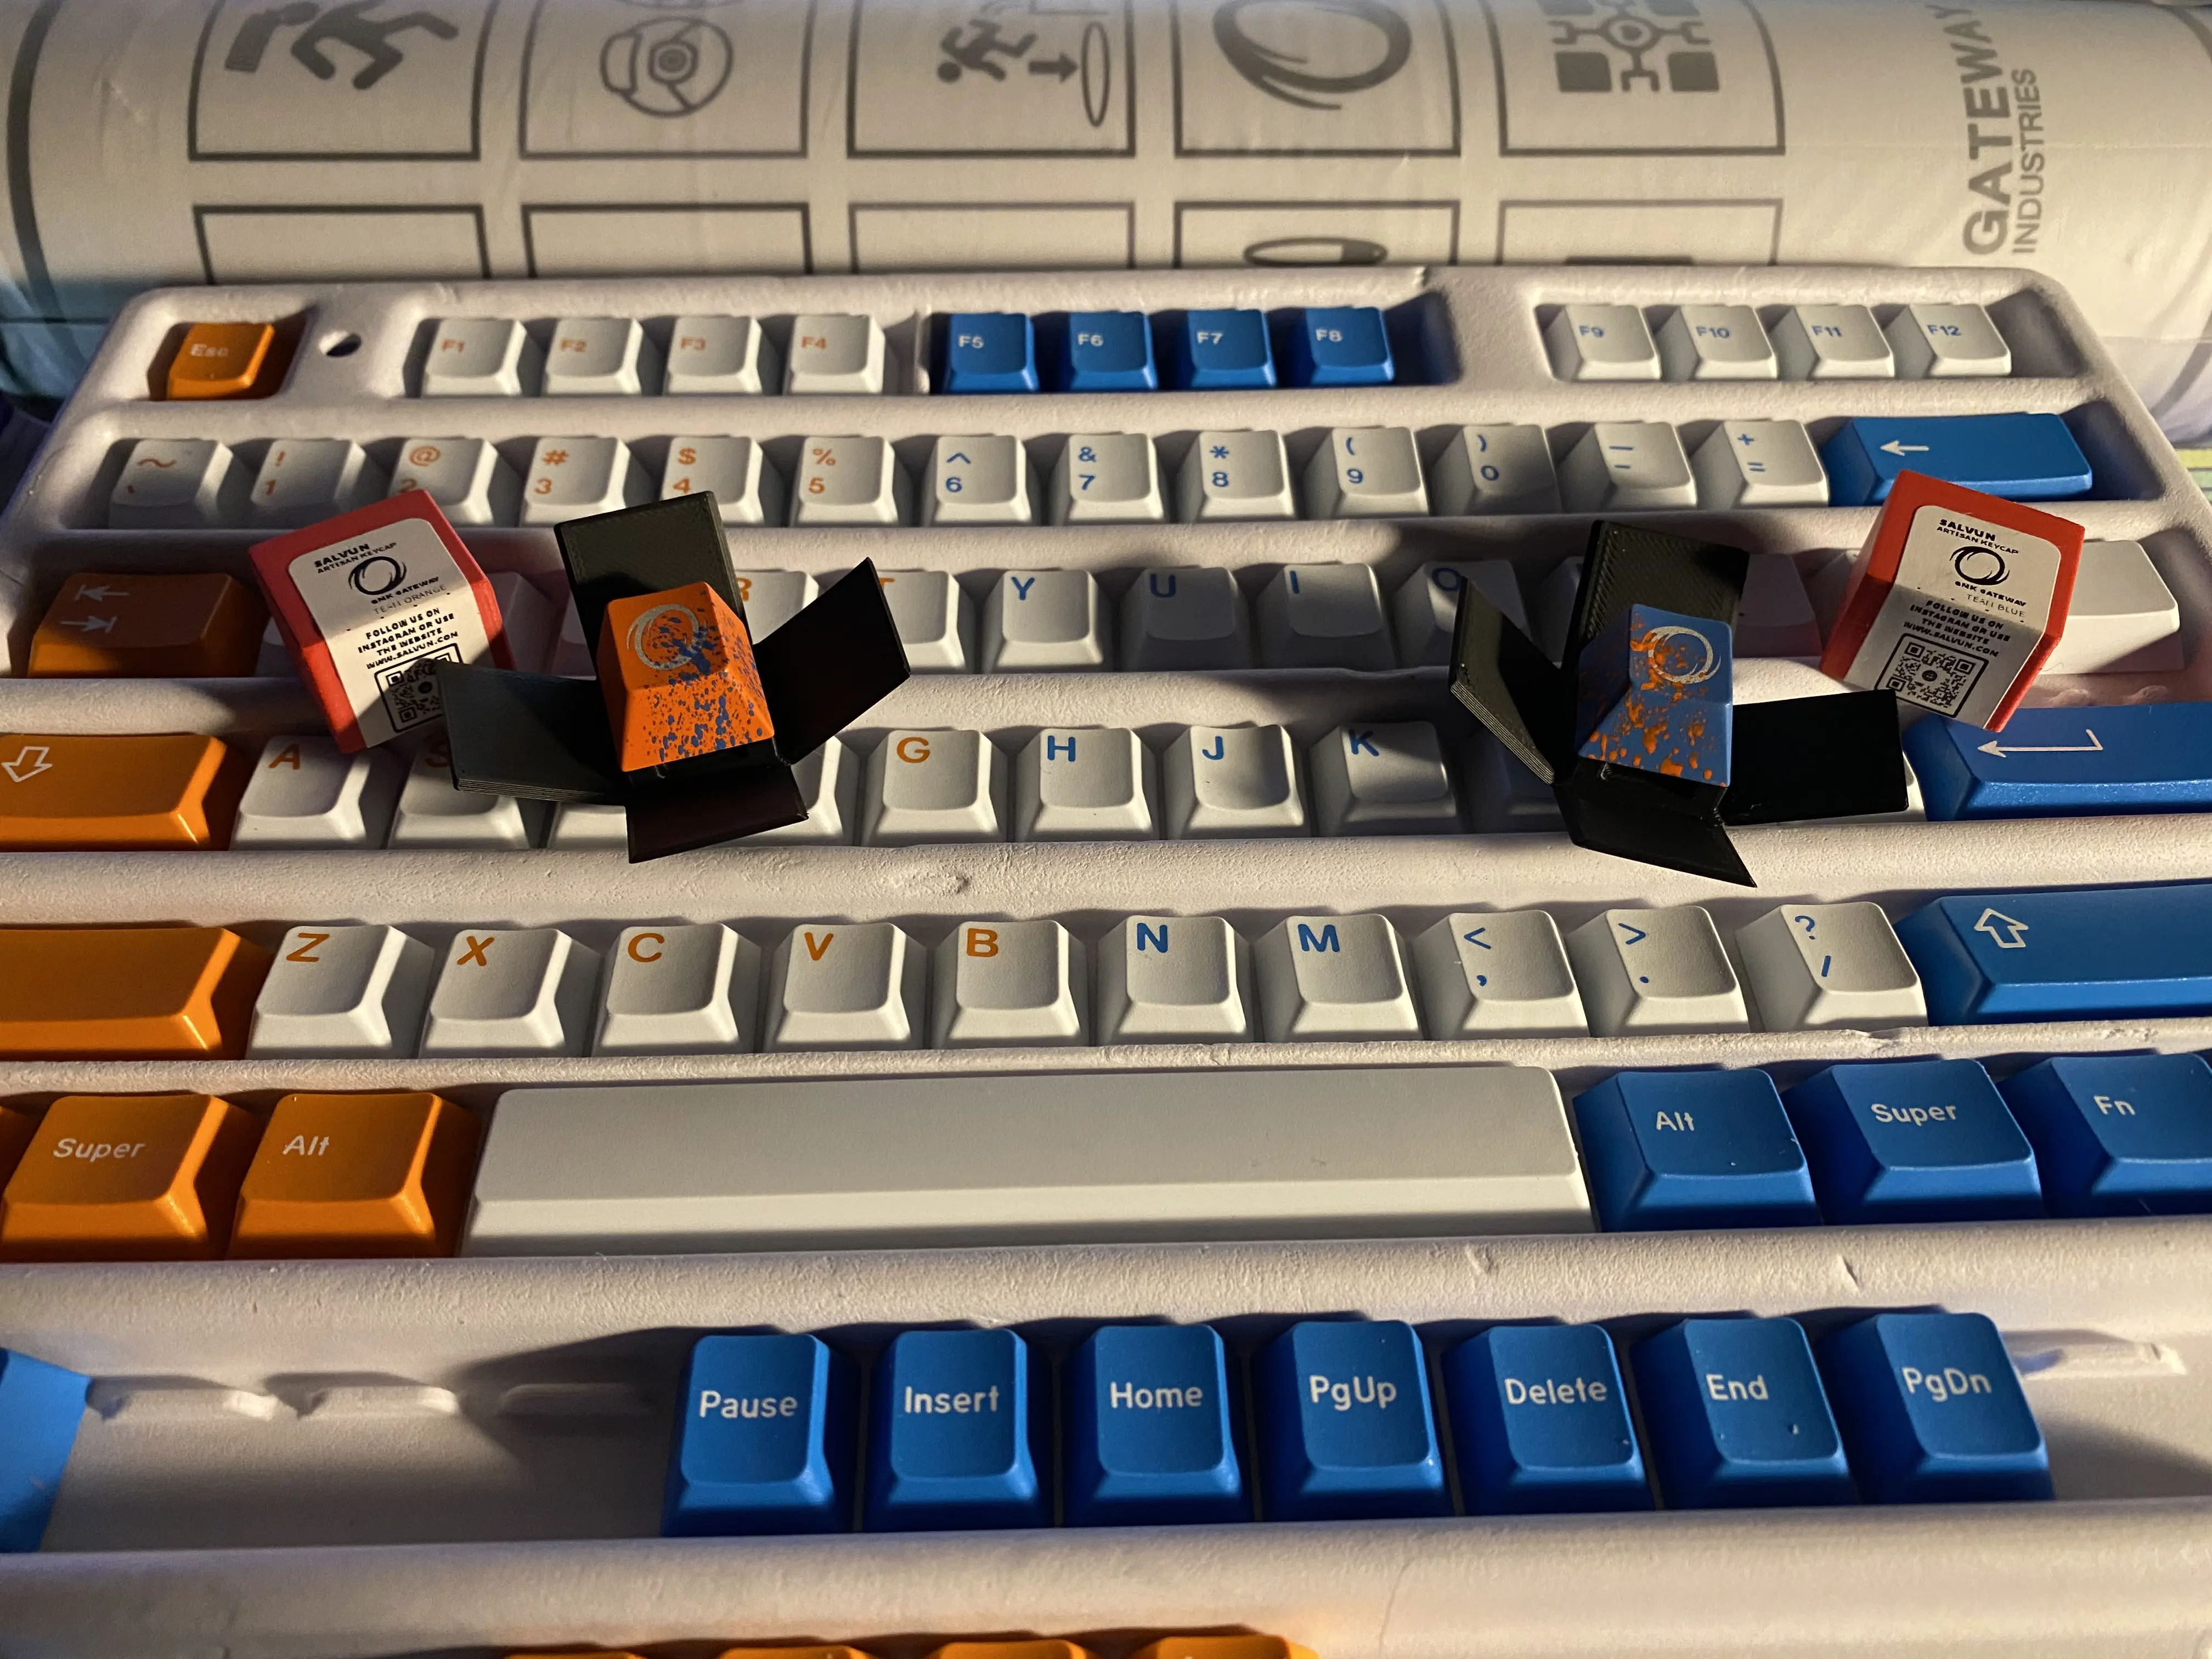 The gmk gateway keycap set with the two salvun artisans shows above and the deskmat behind